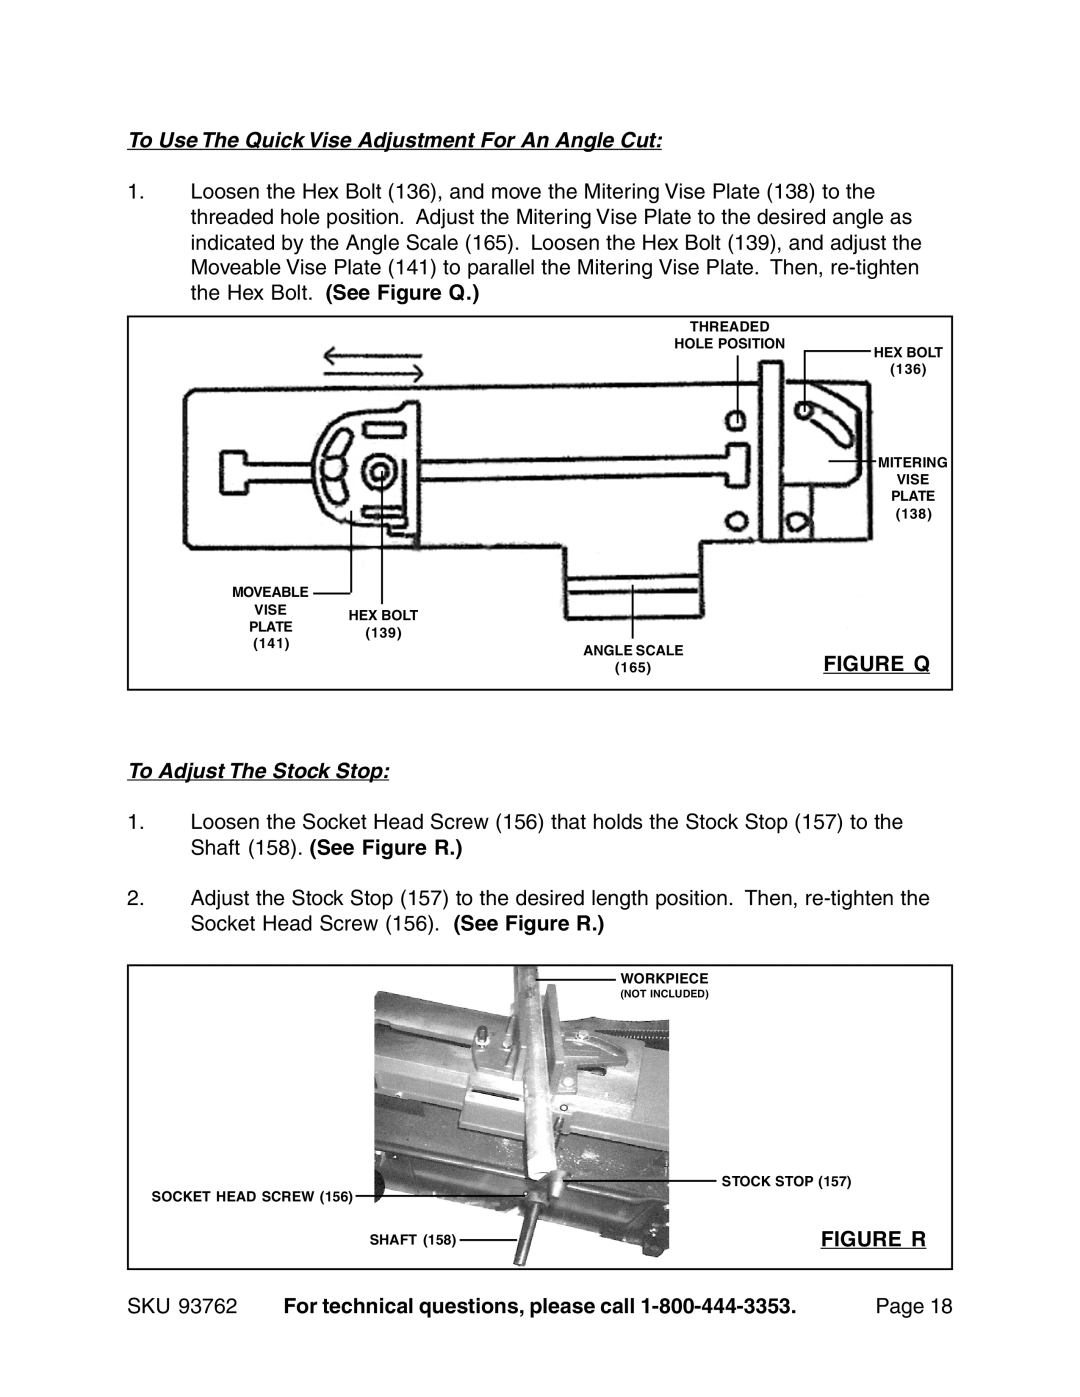 Harbor Freight Tools 93762 To Use The Quick Vise Adjustment For An Angle Cut, Figure Q, To Adjust The Stock Stop, Figure R 